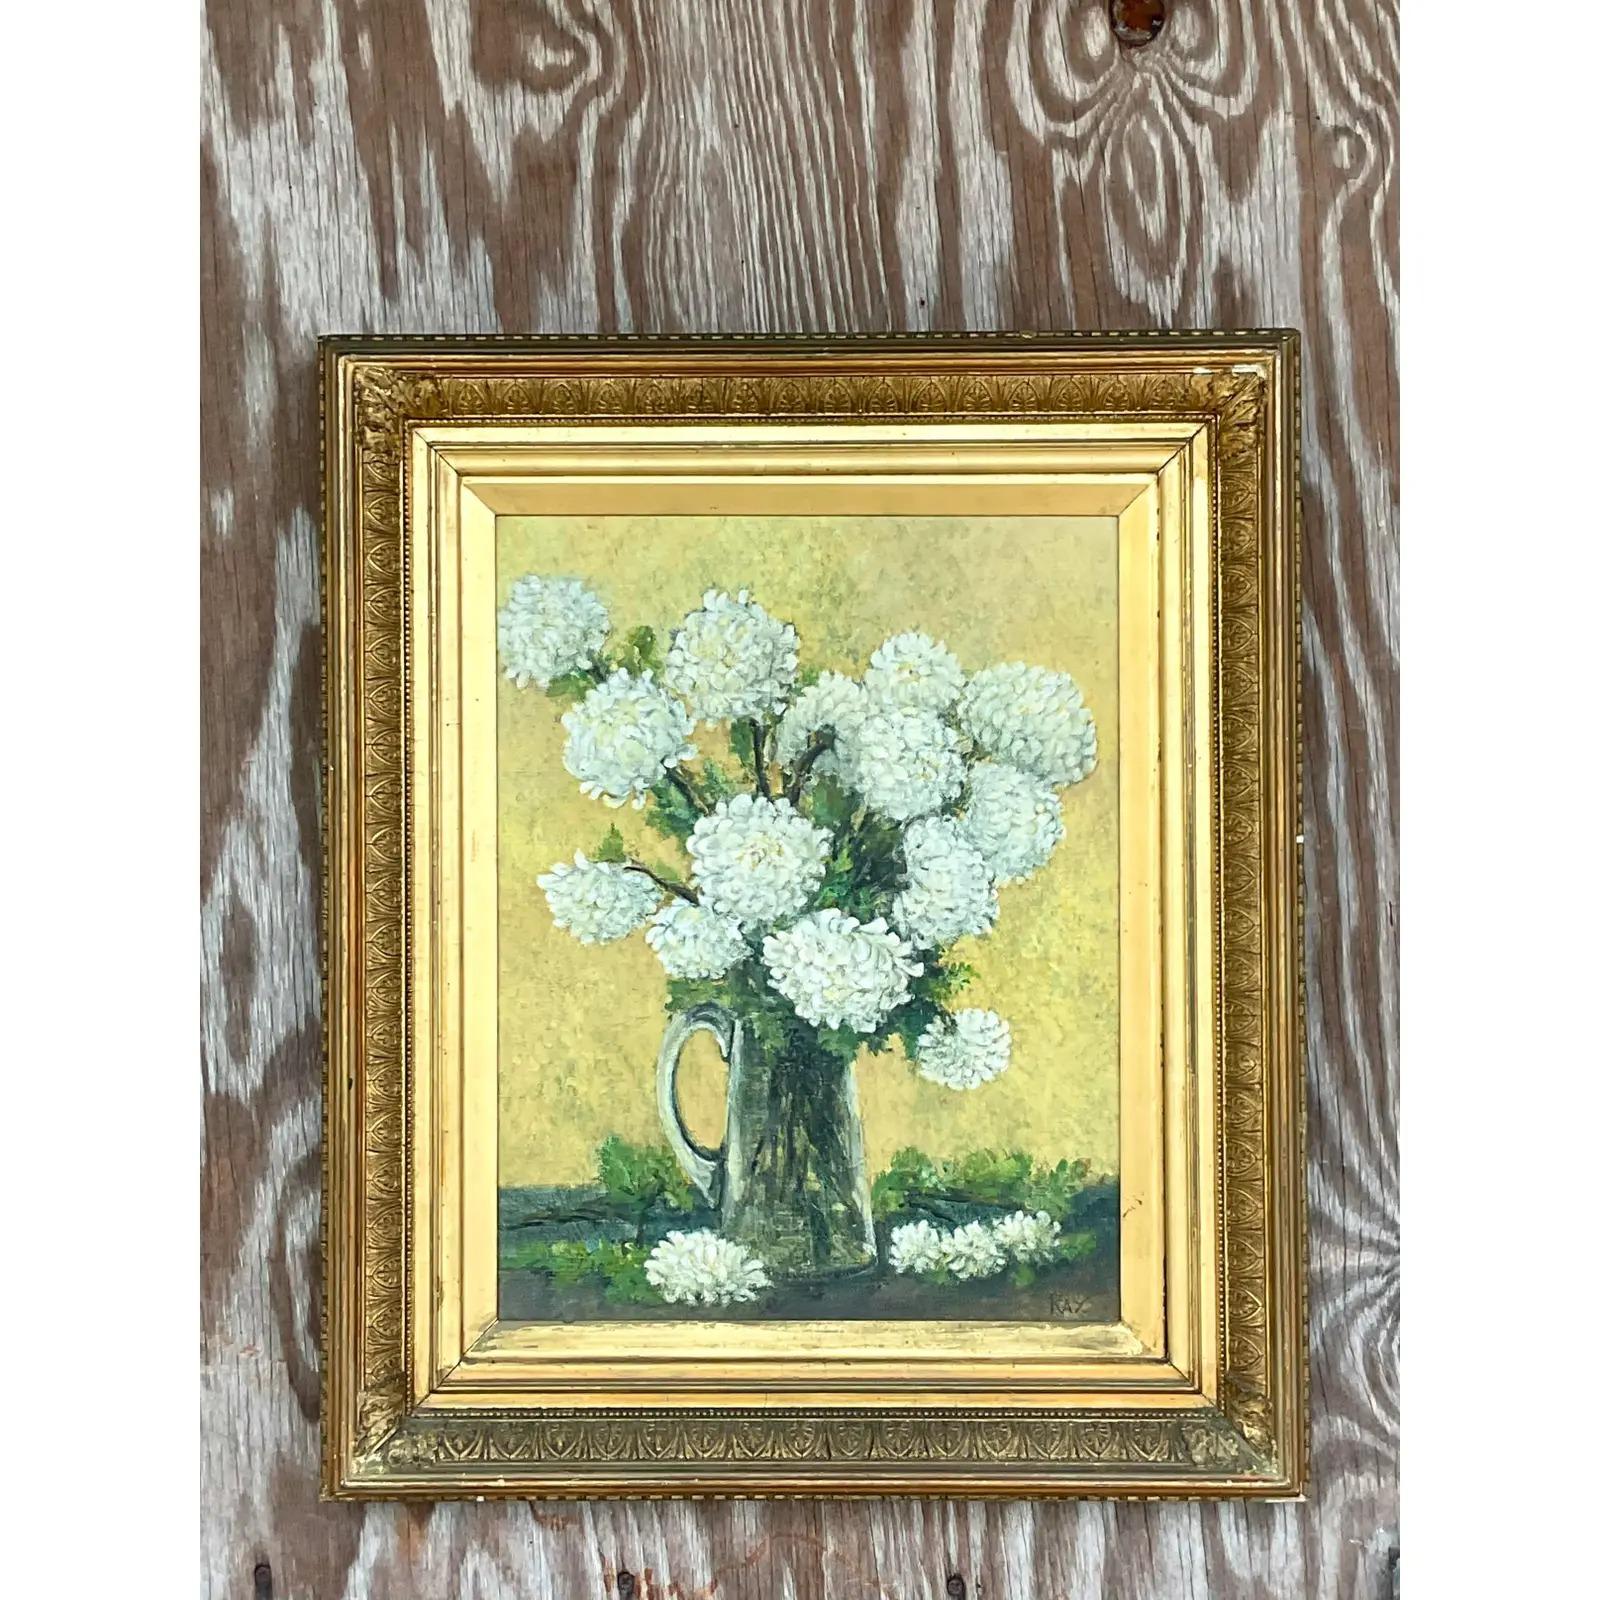 Vintage Regency original oil painting. A beautiful period composition of white flowers in a vase. Signed by the artist. Acquired from a Palm Beach estate.